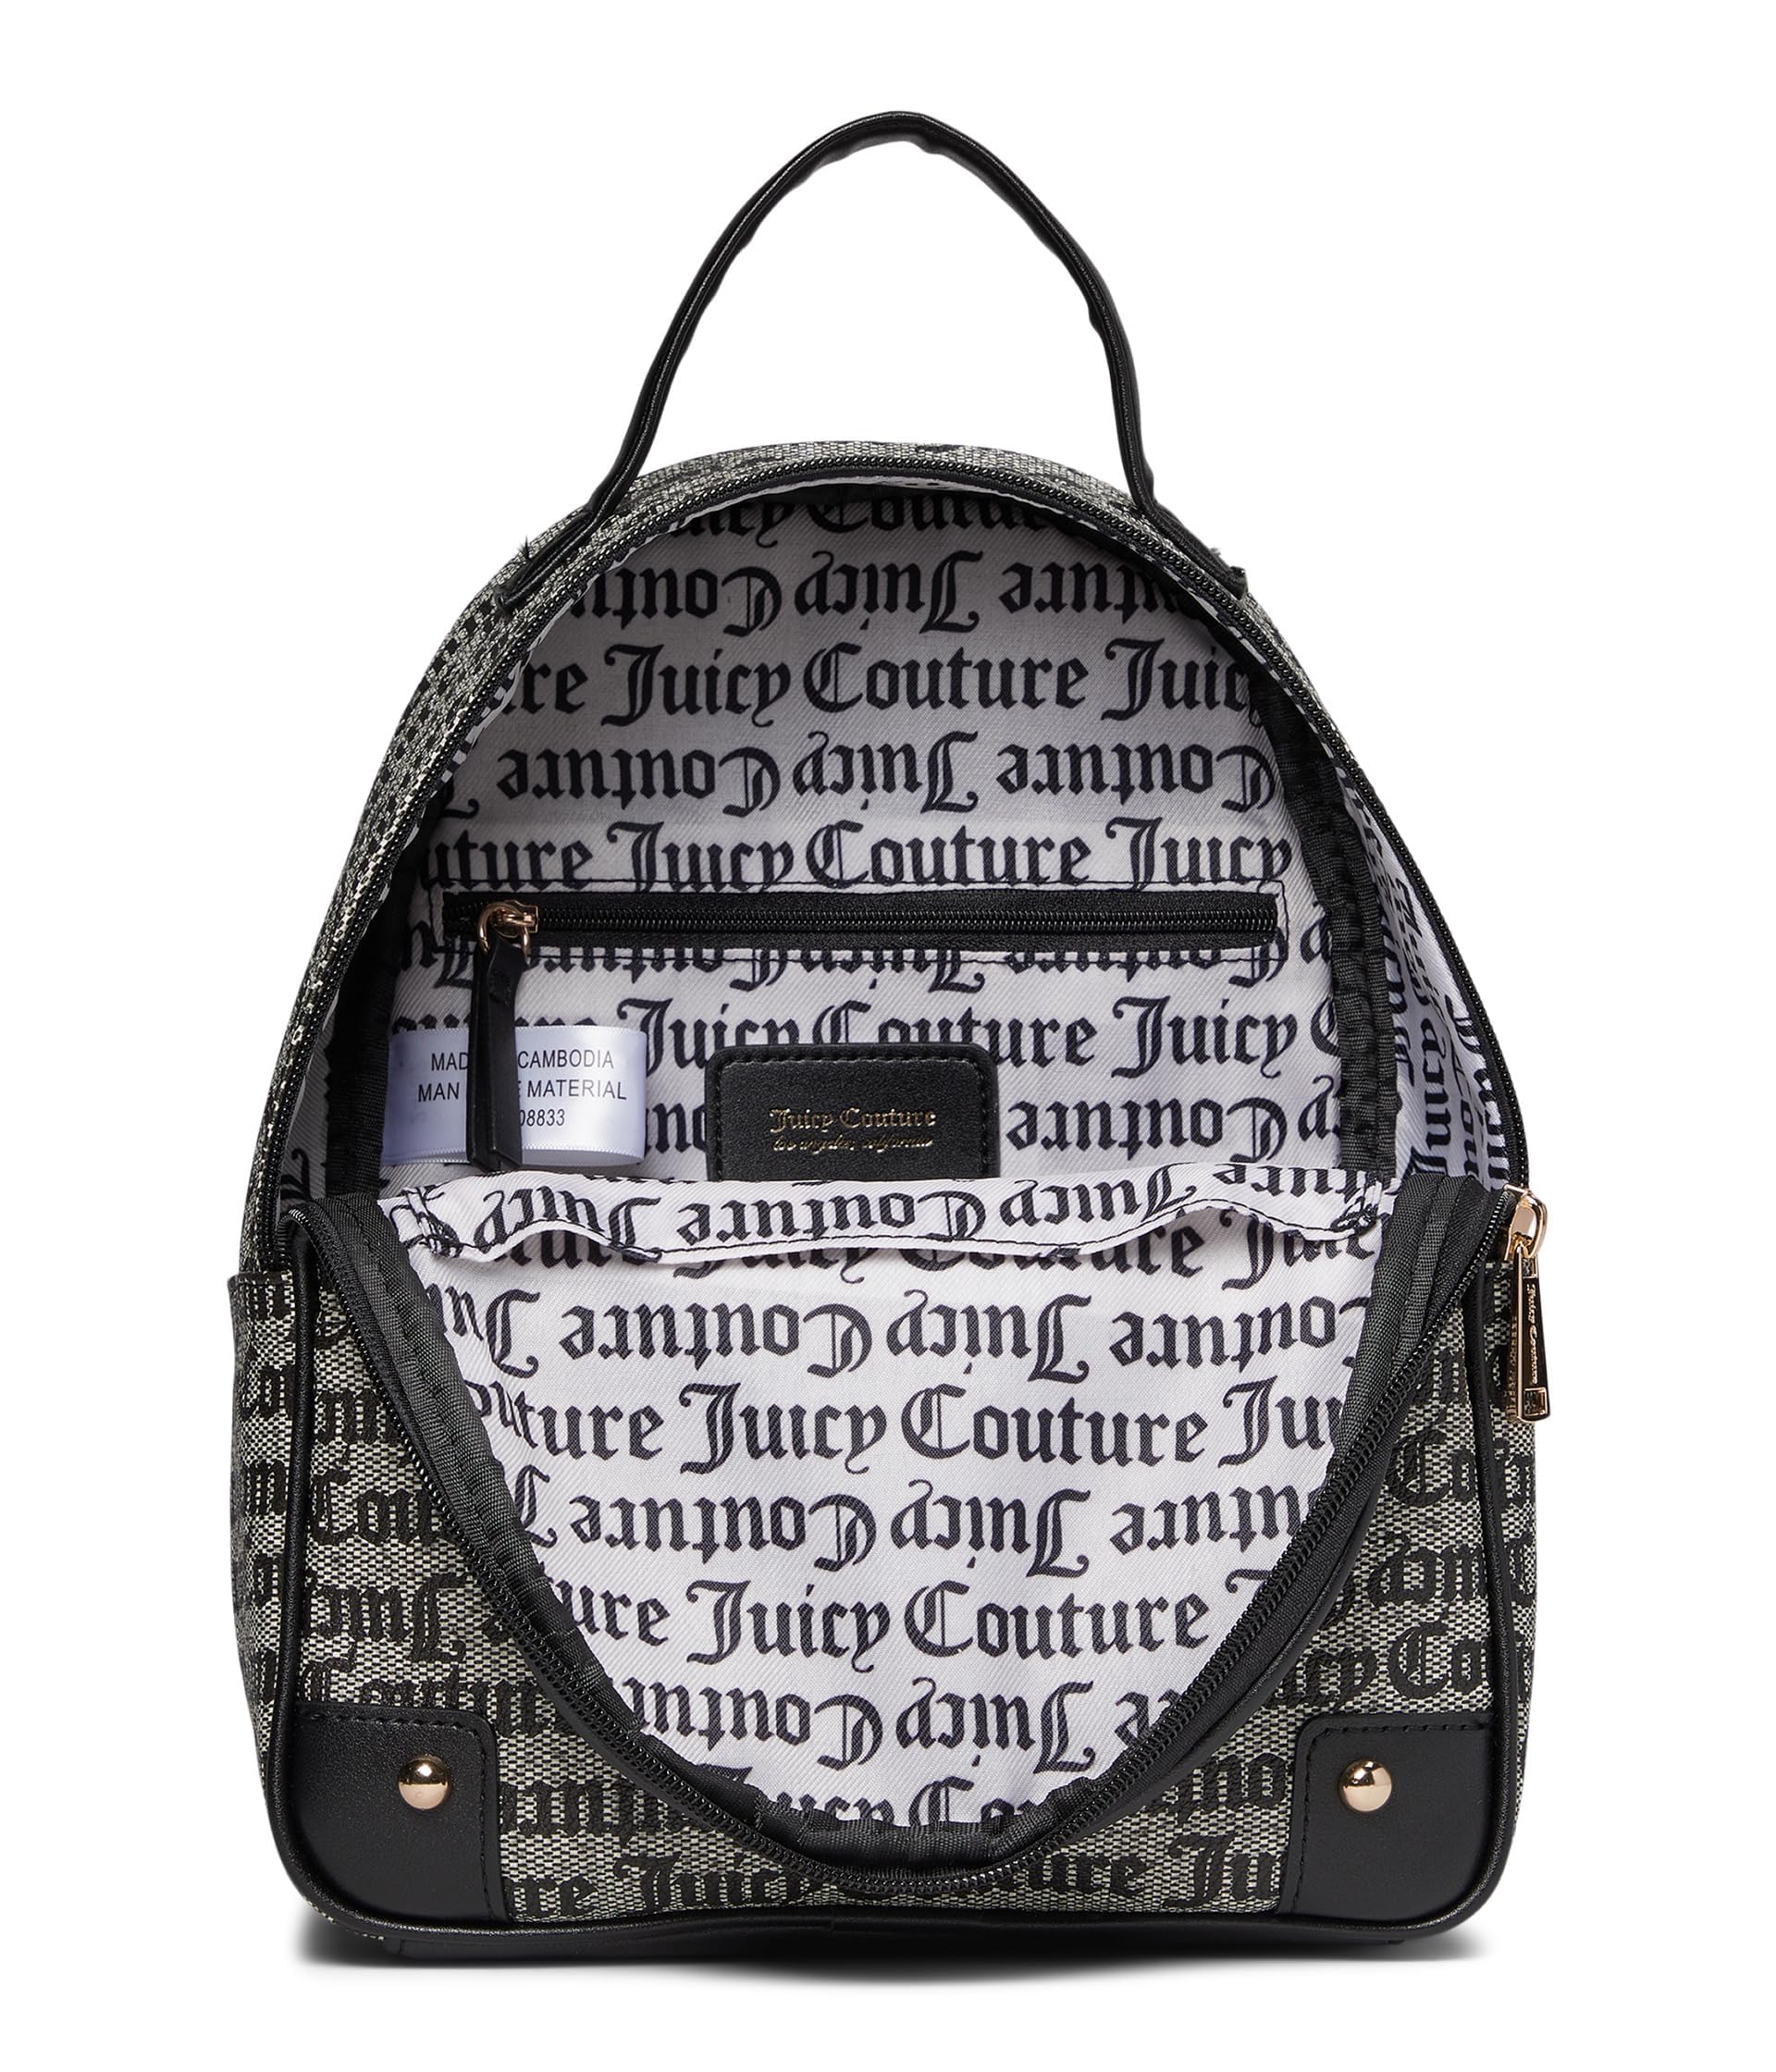 Juicy Couture Pullout Pouch Backpack Black/Beige One Size